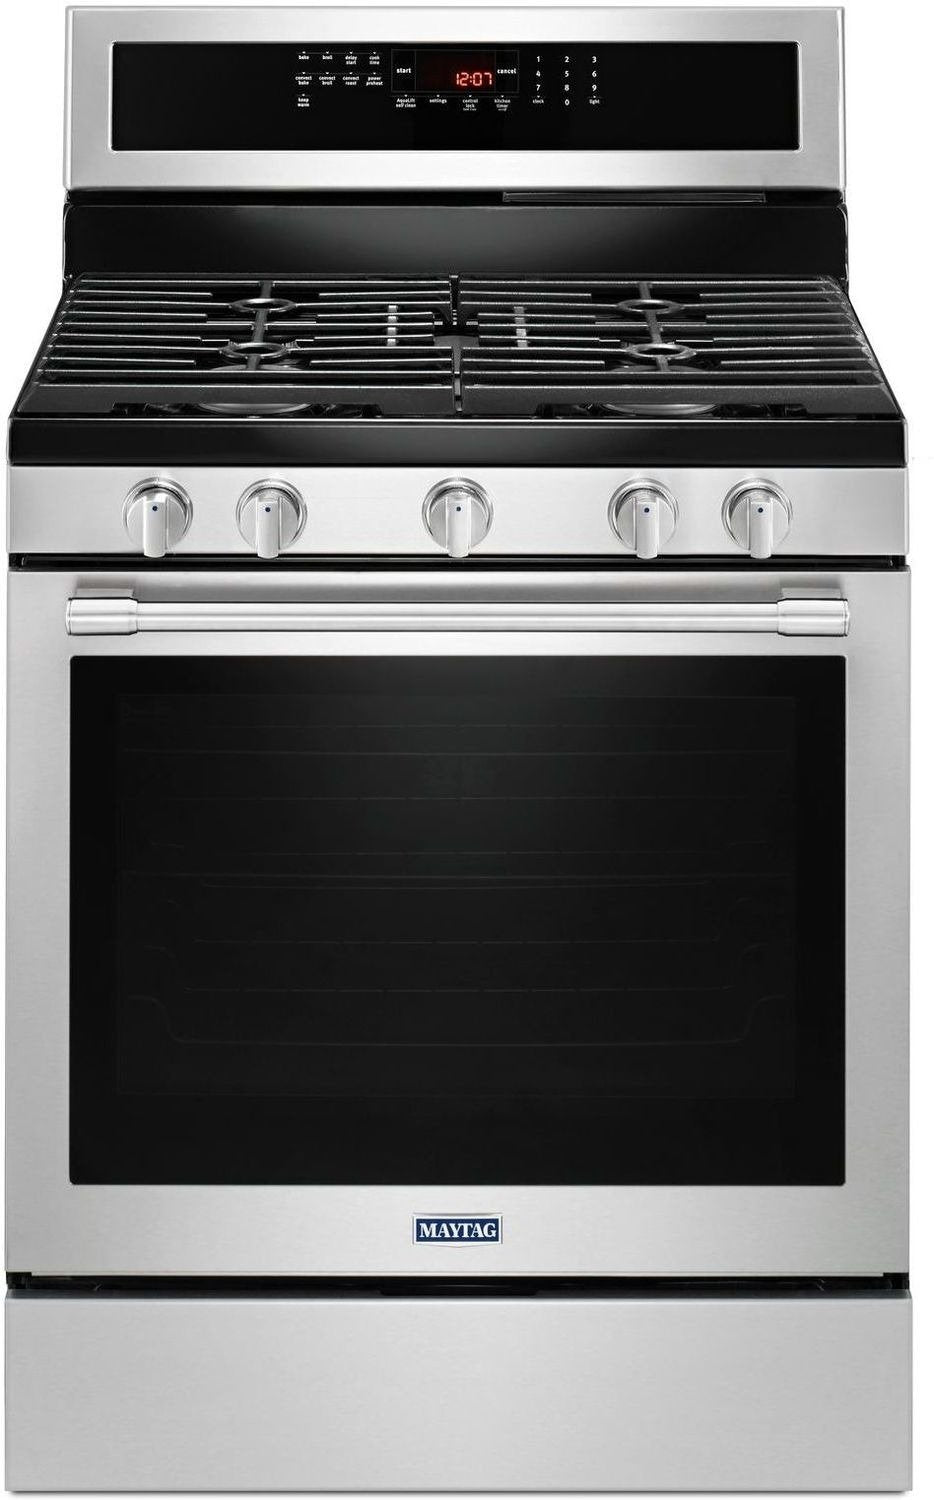 Maytag - 30 Inch Wide Gas Range with True Convection - MGR8800FZ